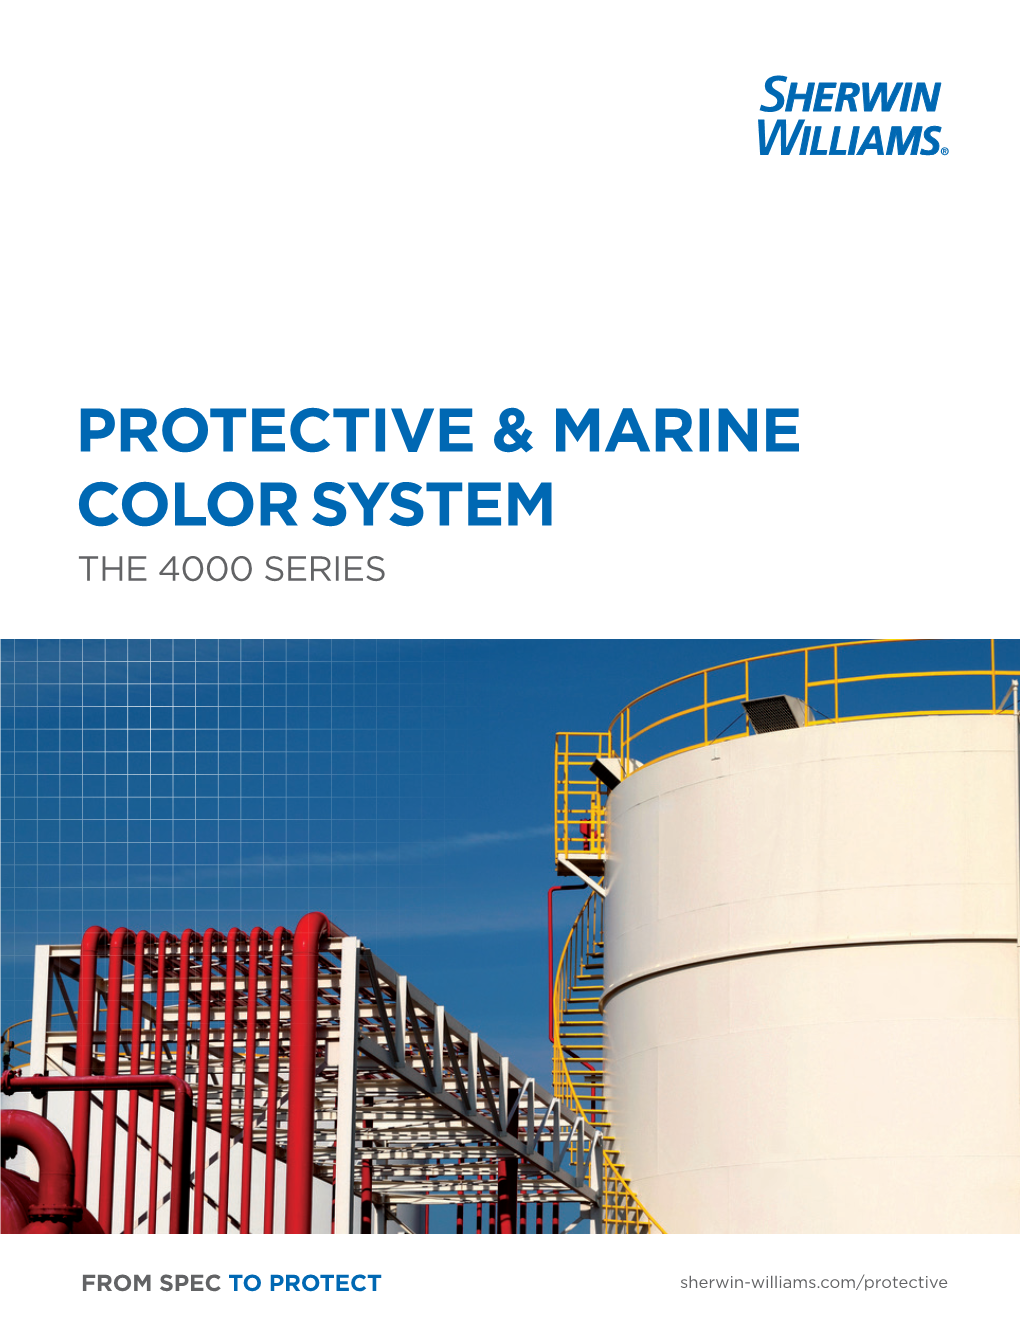 Protective & Marine Color System